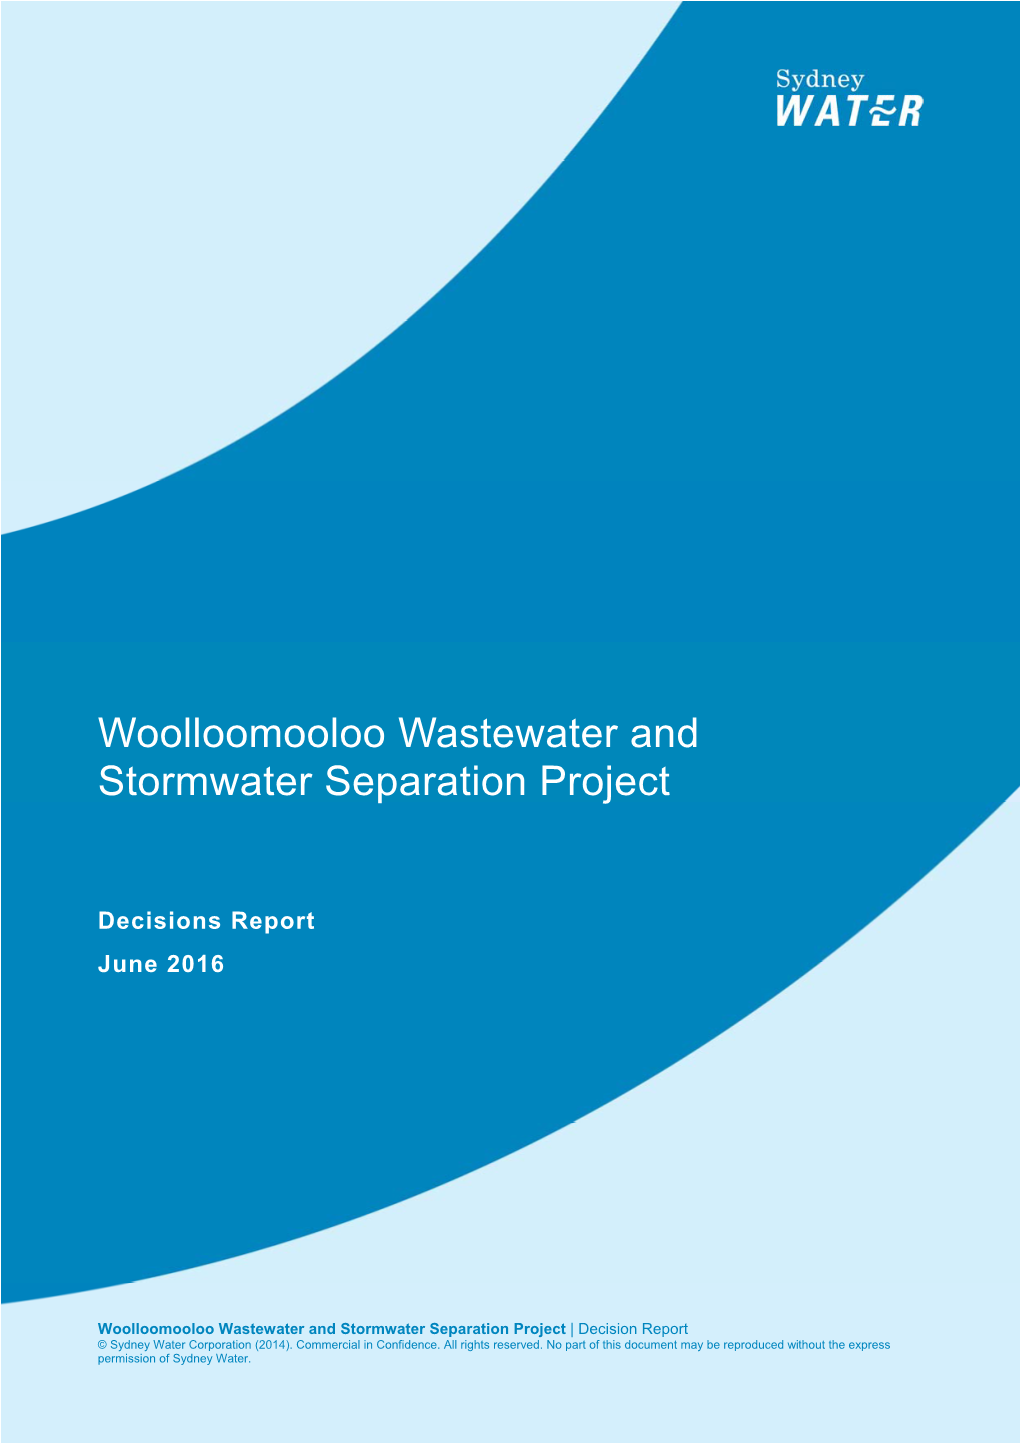 Woolloomooloo Wastewater and Stormwater Separation Project